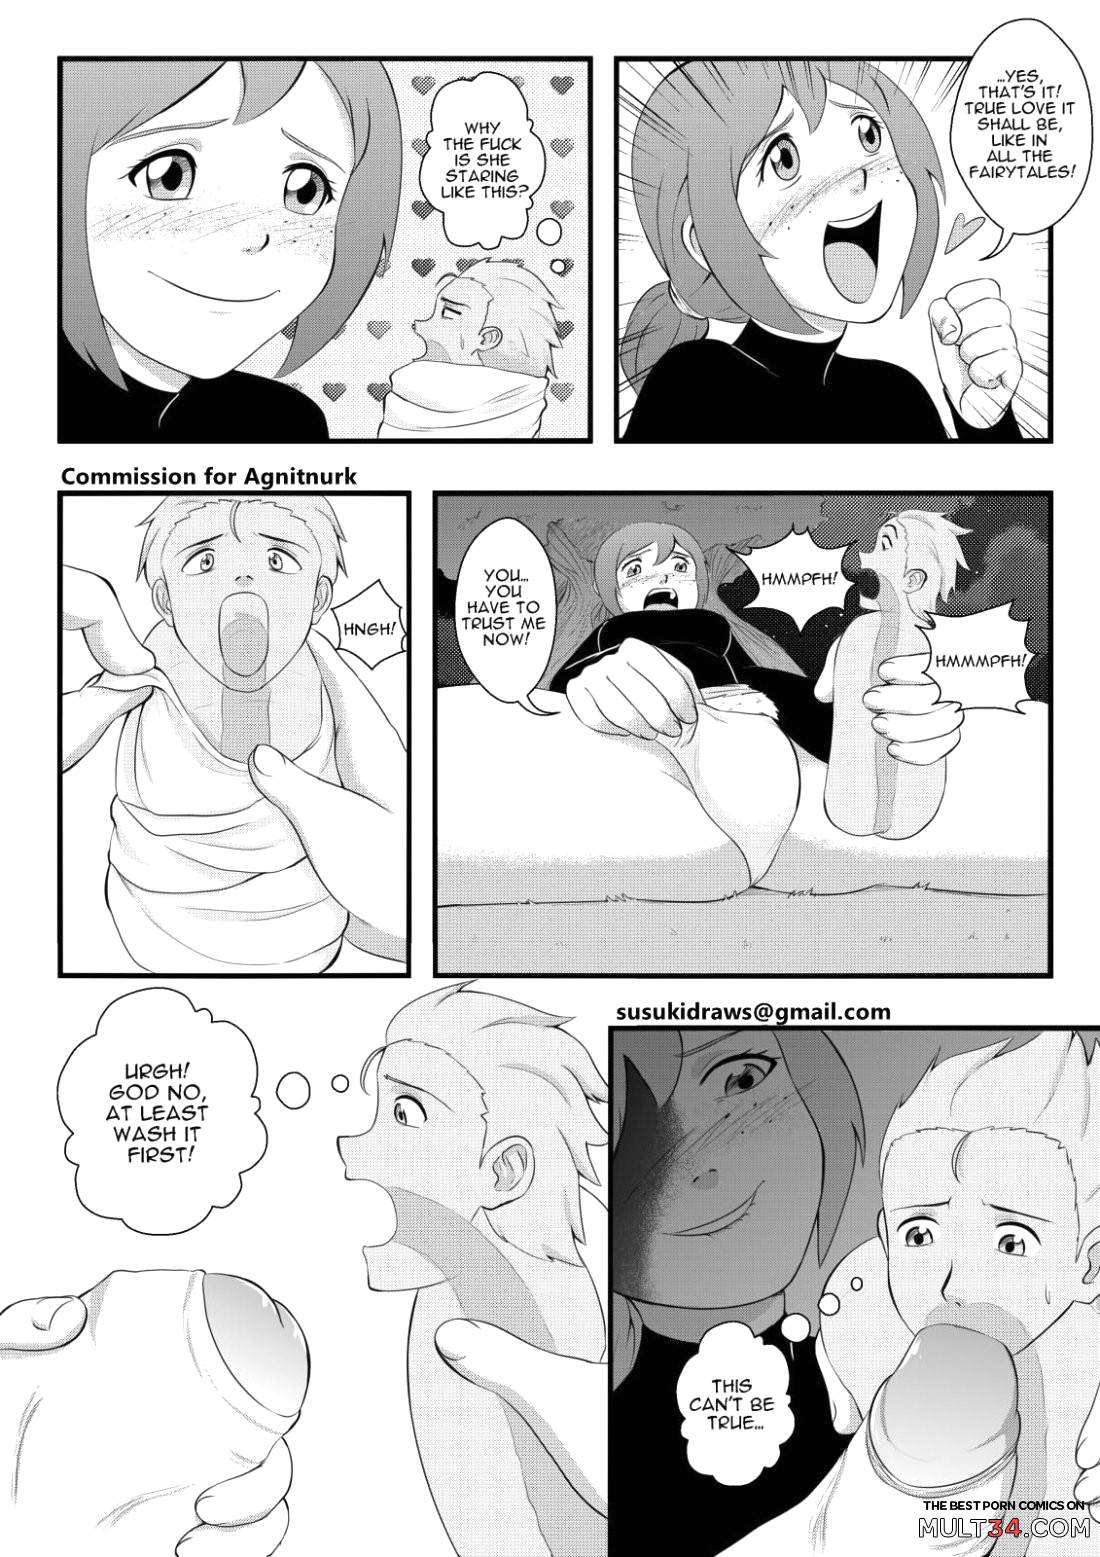 Onahole Guy page 4